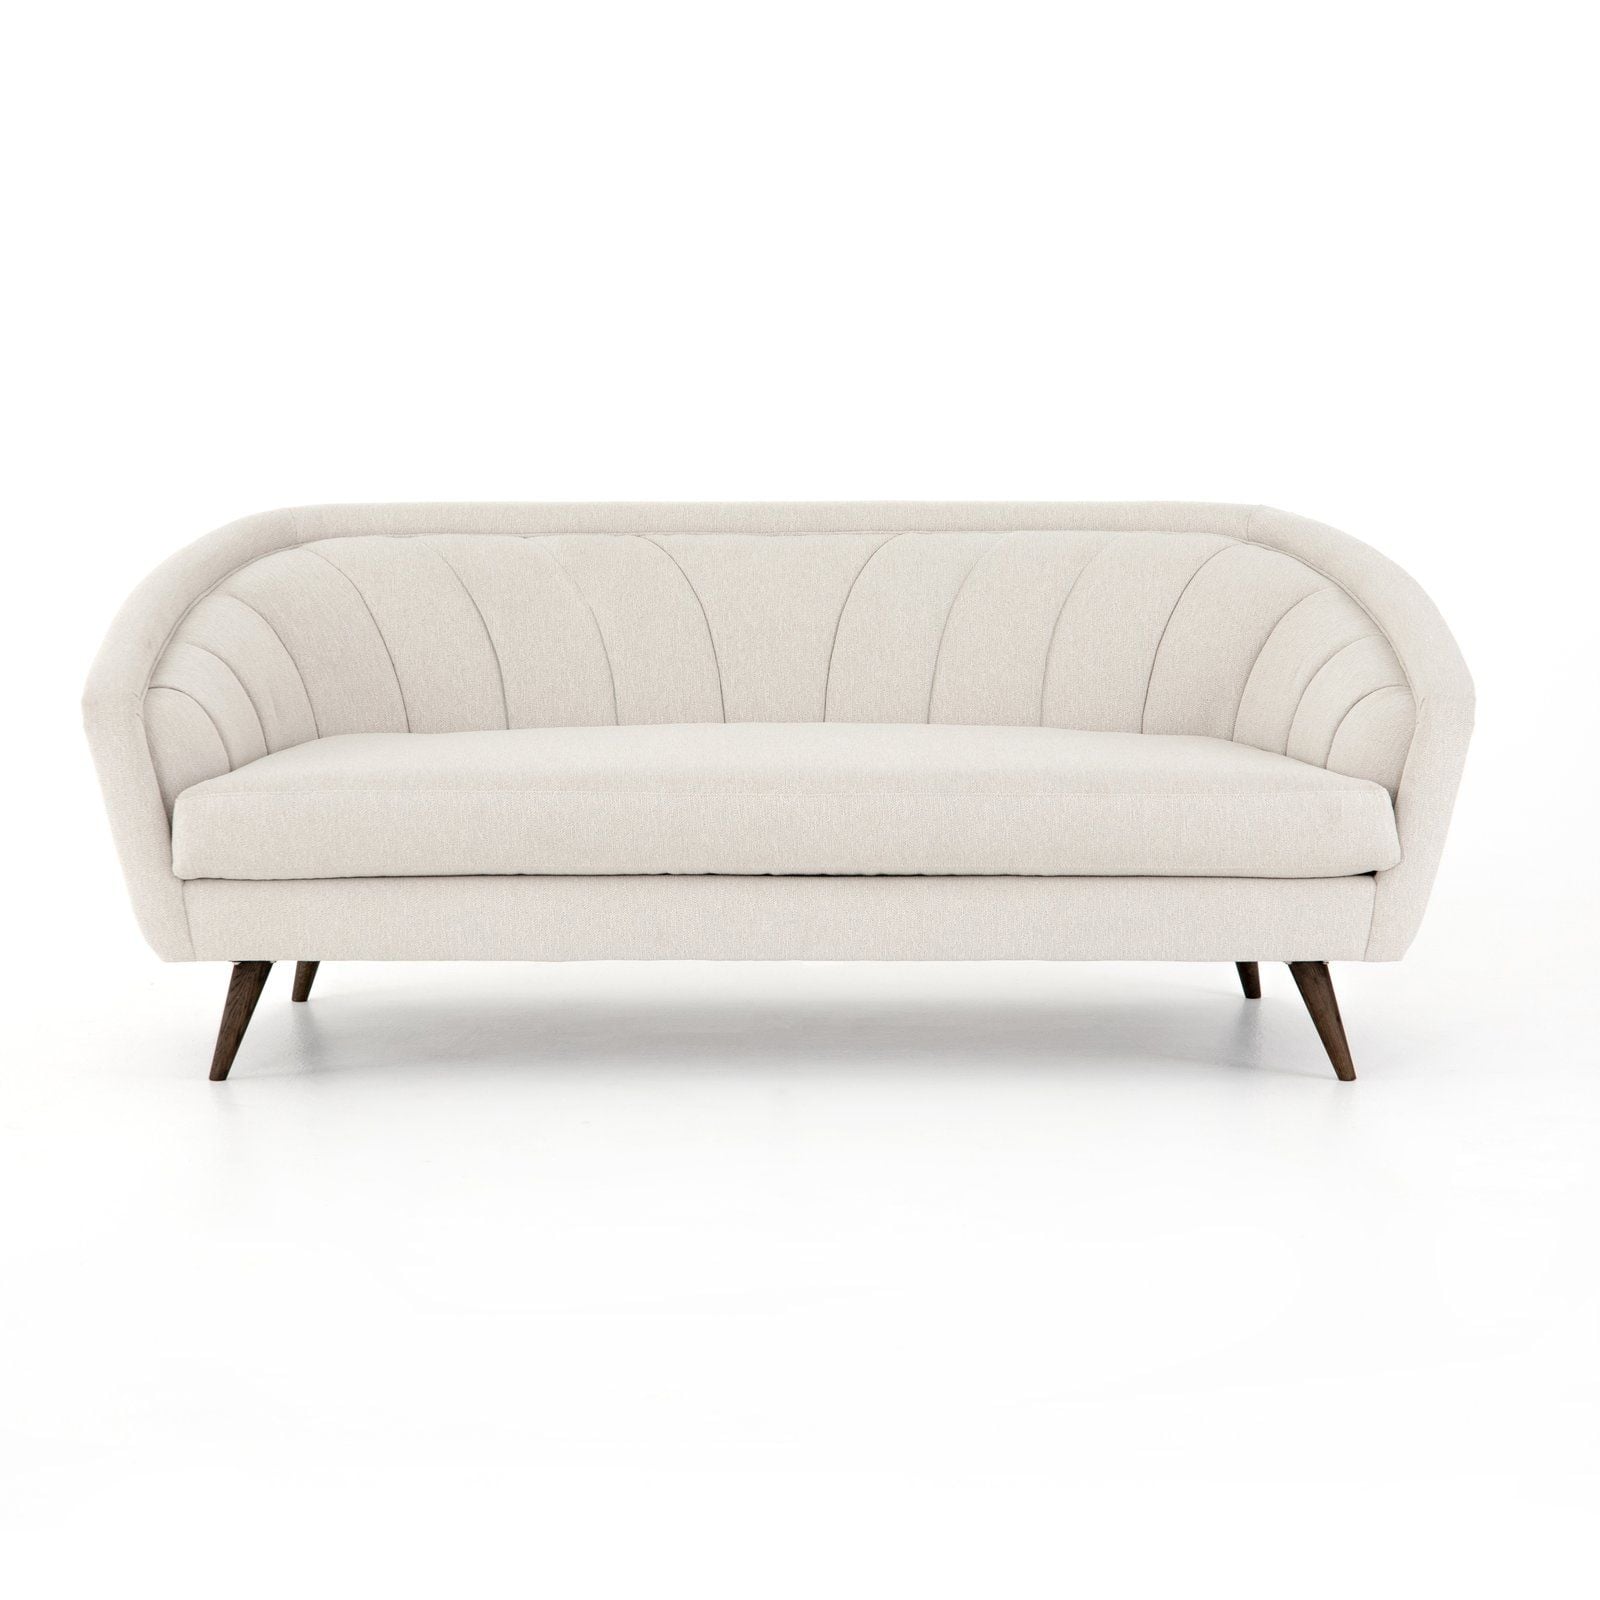 The simple, elegant Daphne sofa featured in Magnolia's new fall furniture collection. 